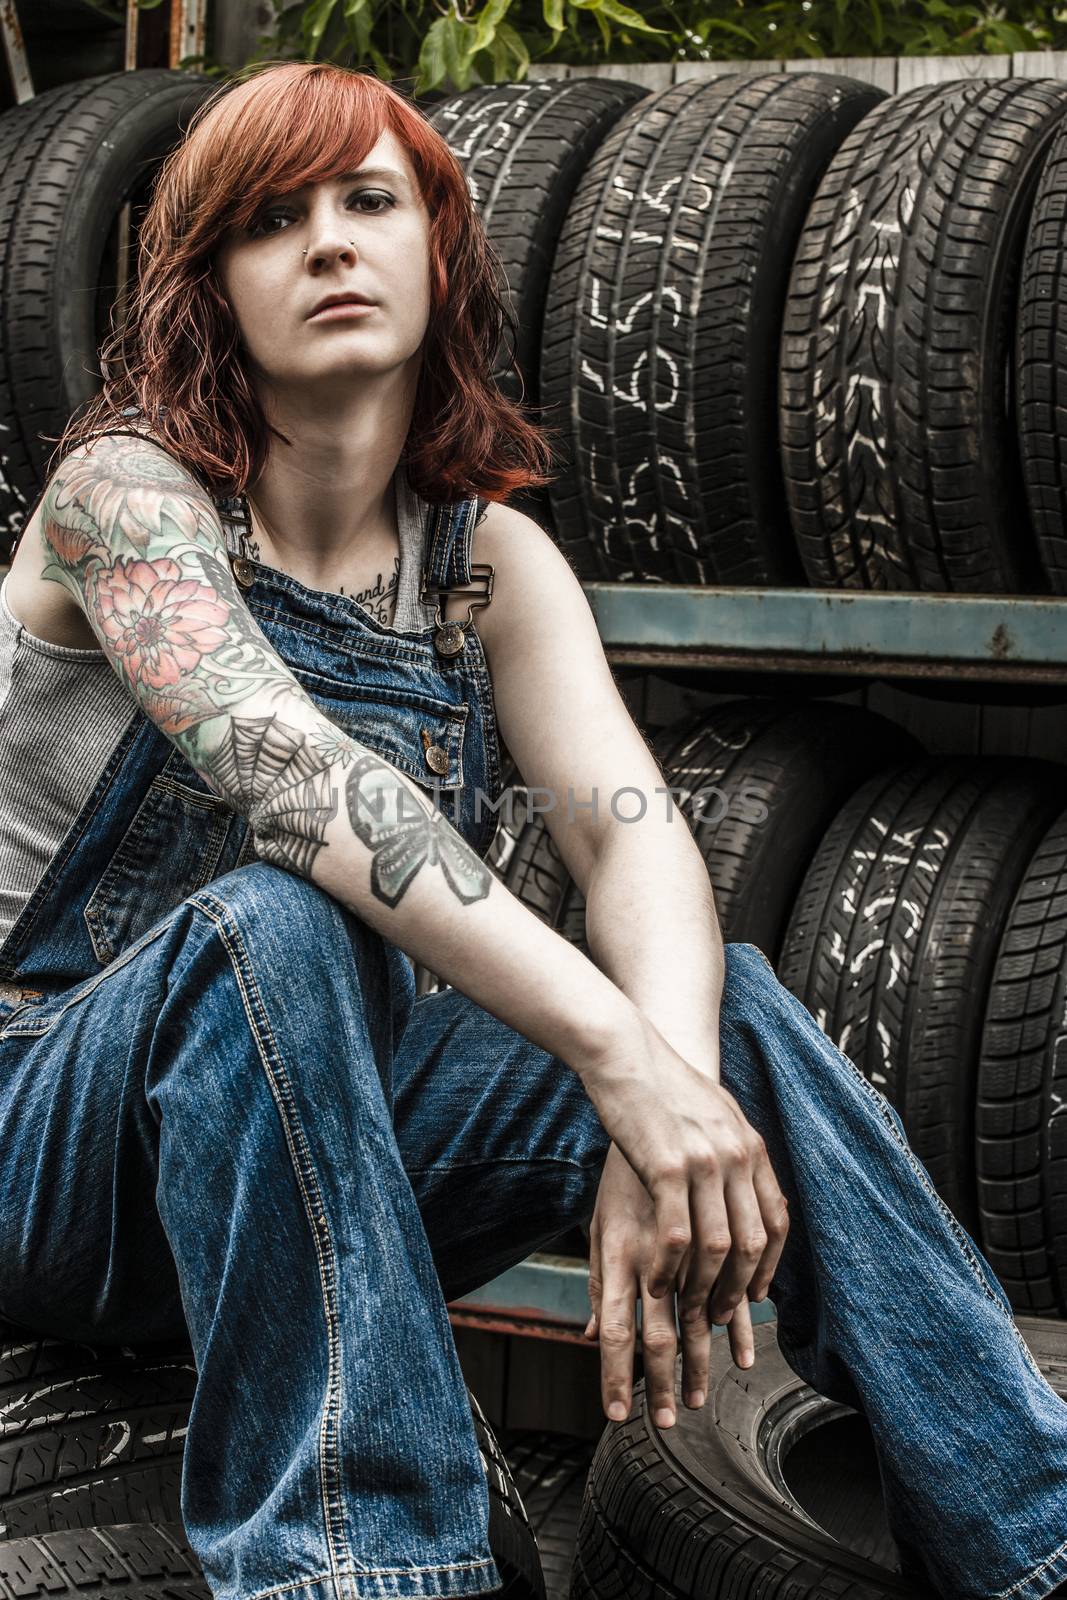 Photo of a young beautiful redhead mechanic wearing overalls and sitting behind an old garage. Attached property release is for arm tattoos.